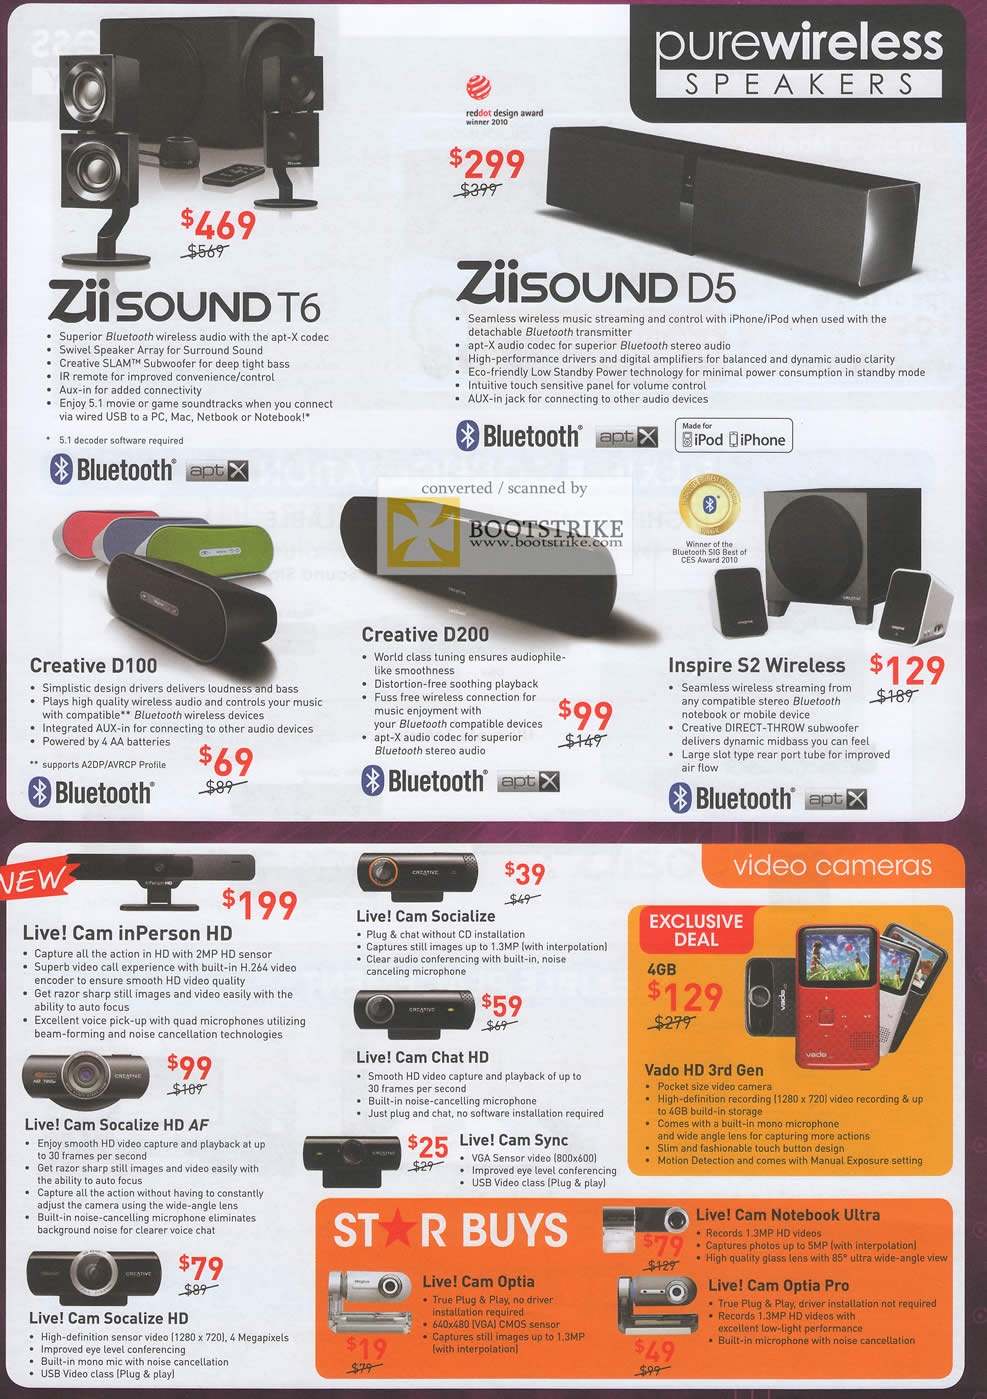 PC Show 2011 price list image brochure of Creative Speakers Pure Wireless ZiiSound T6 D5 D100 D200 Inspire S2 Live! Cam InPerson HD Socialize HD AF Chat Sync Vado Optia Notebook Ultra Pro